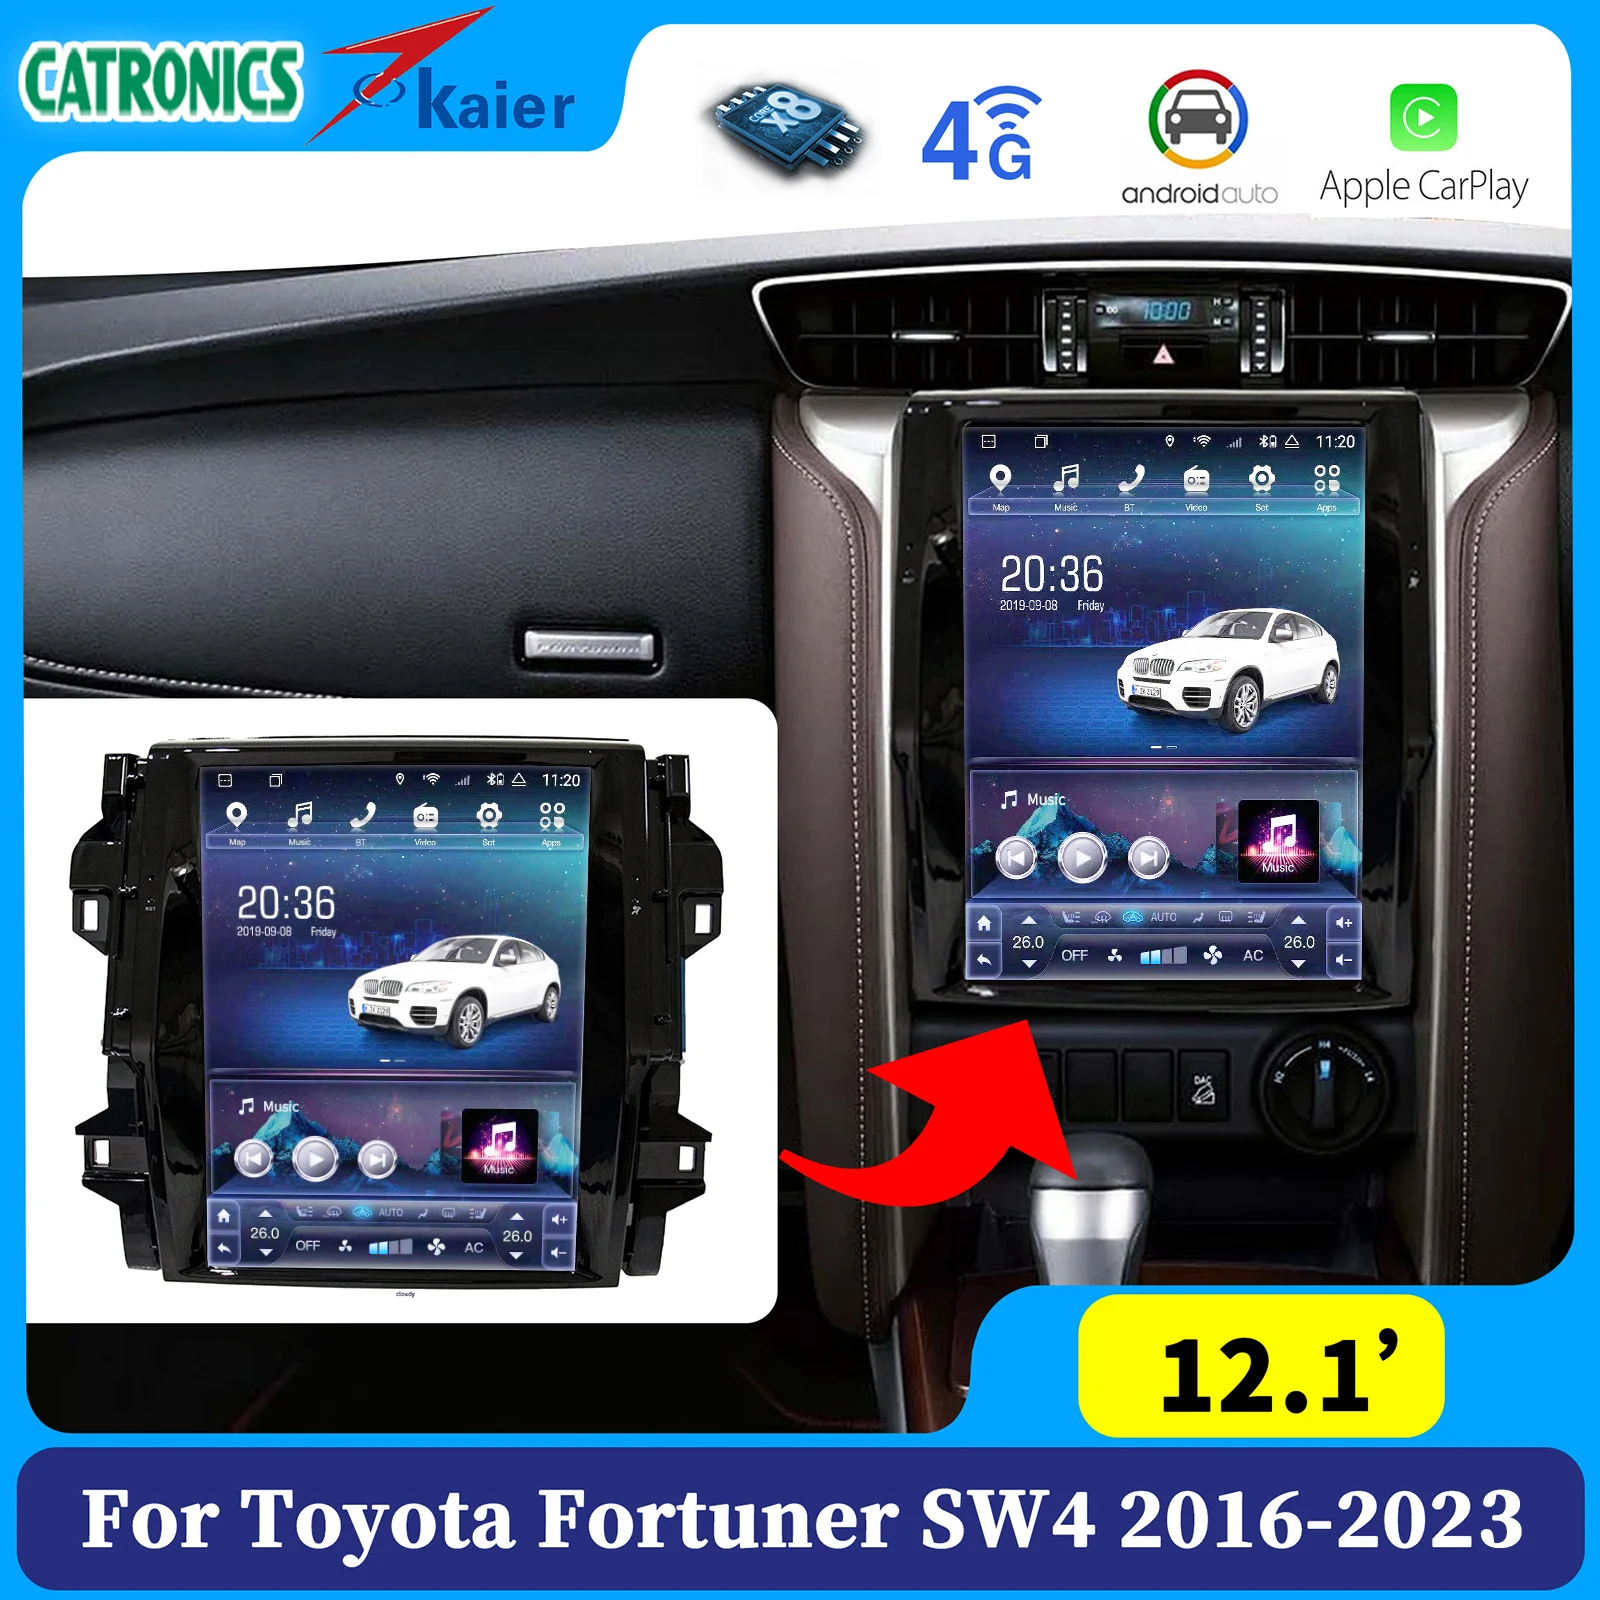 Tesla Central multimidia para Toyota Fortuner 2,8 VRZ Hilux SW4 pantalla 2022 2020 2023 2019 2016 2017 2018 accesorios Android para coche